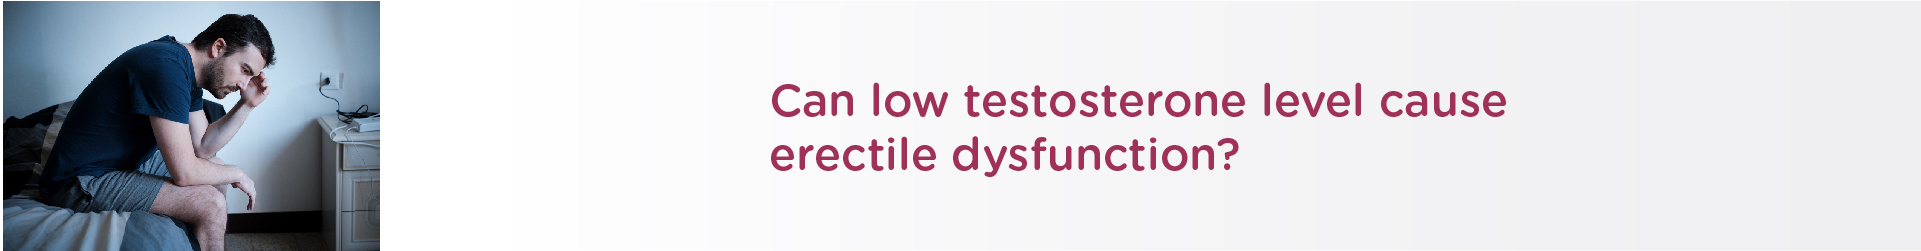 Can Low Testosterone Level Cause Erectile Dysfunction?